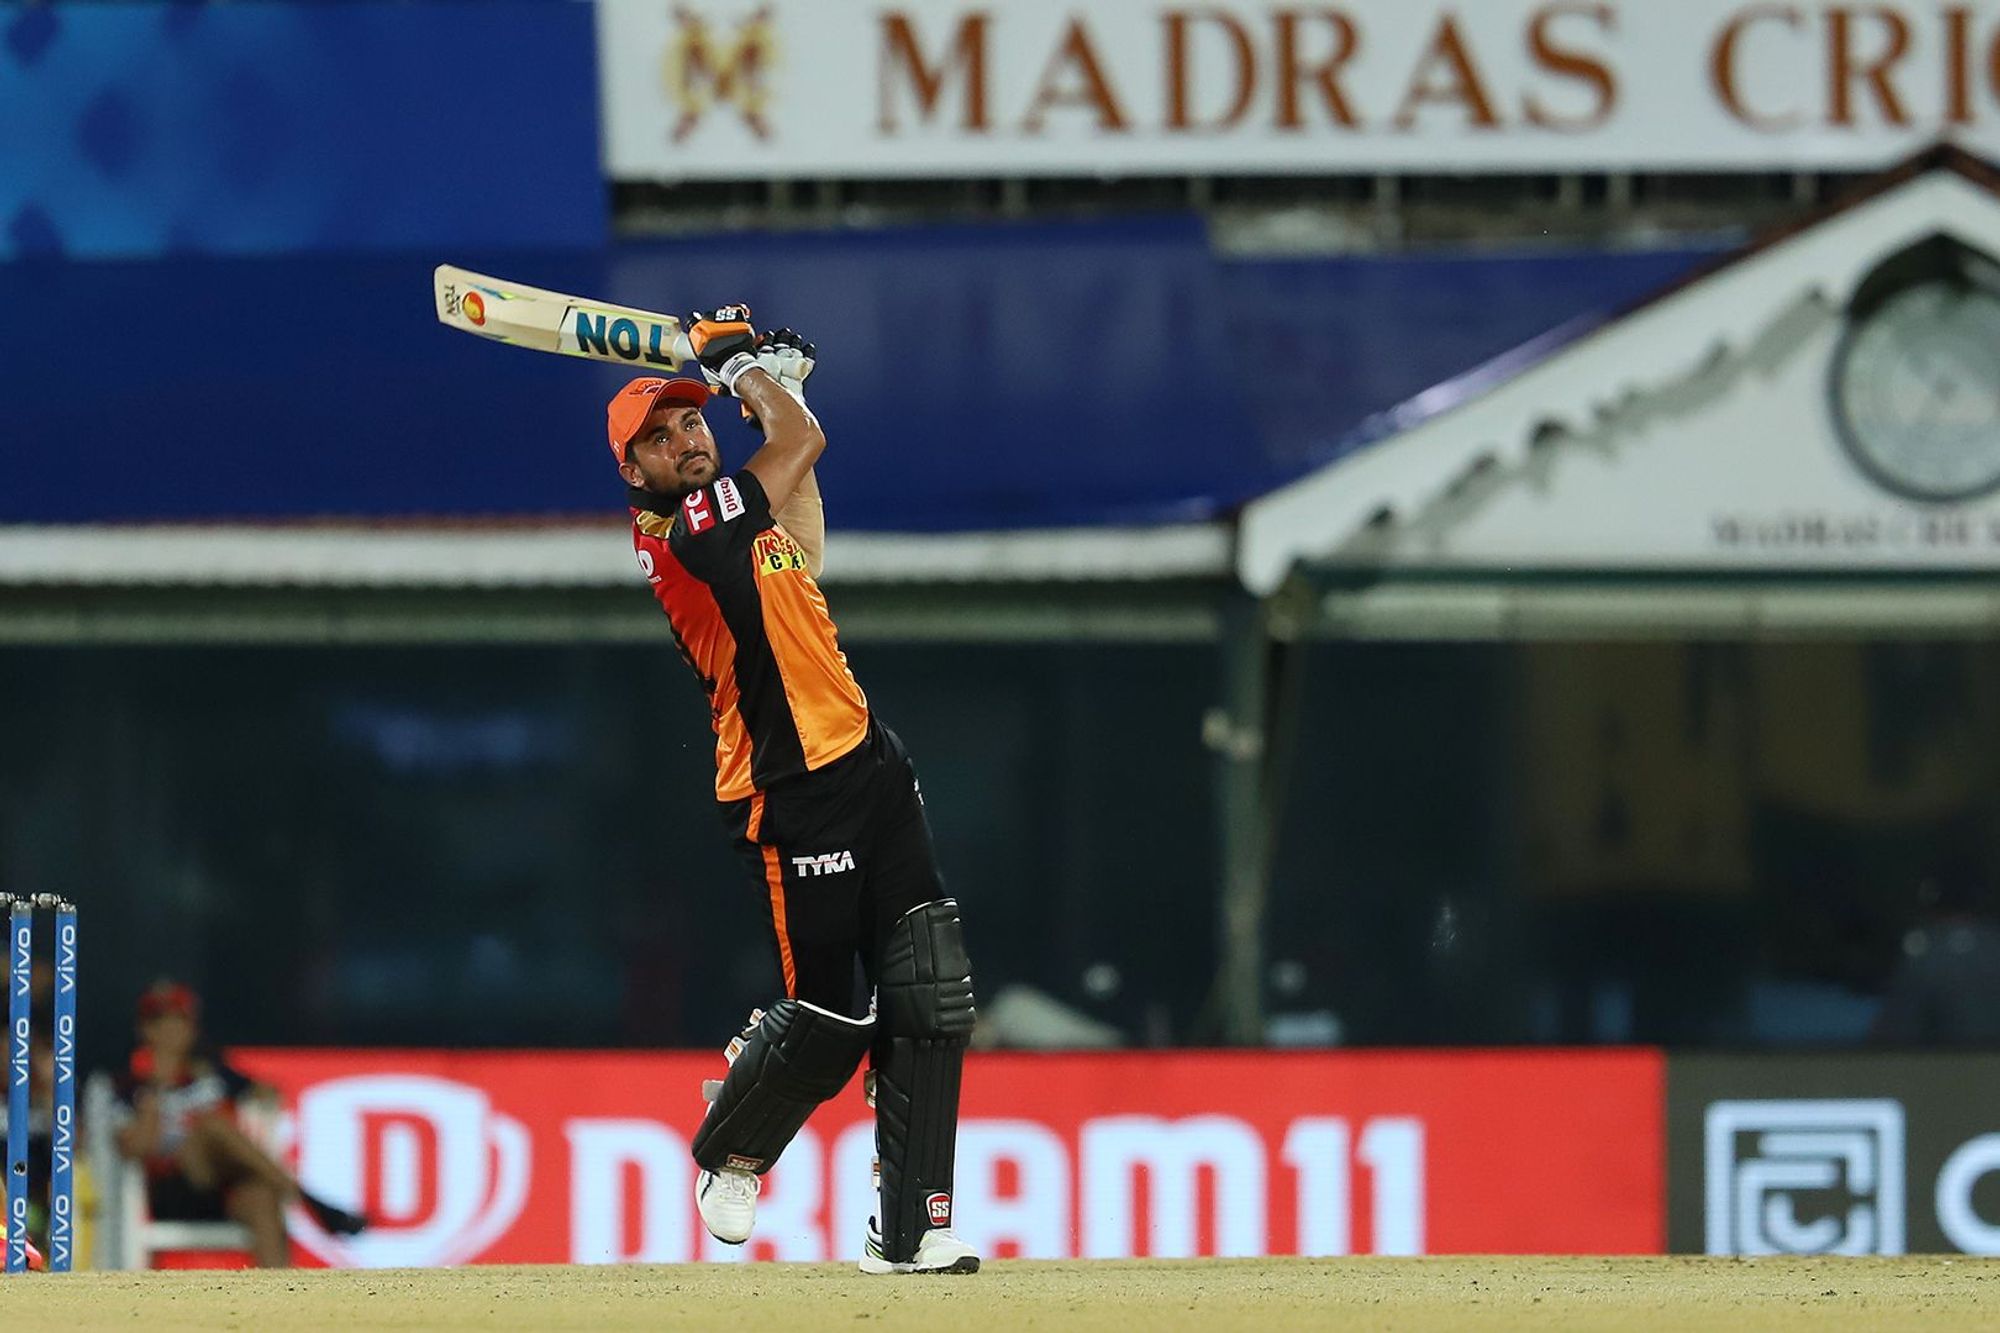 Manish Pandey yet again failed to covert his start | BCCI/IPL